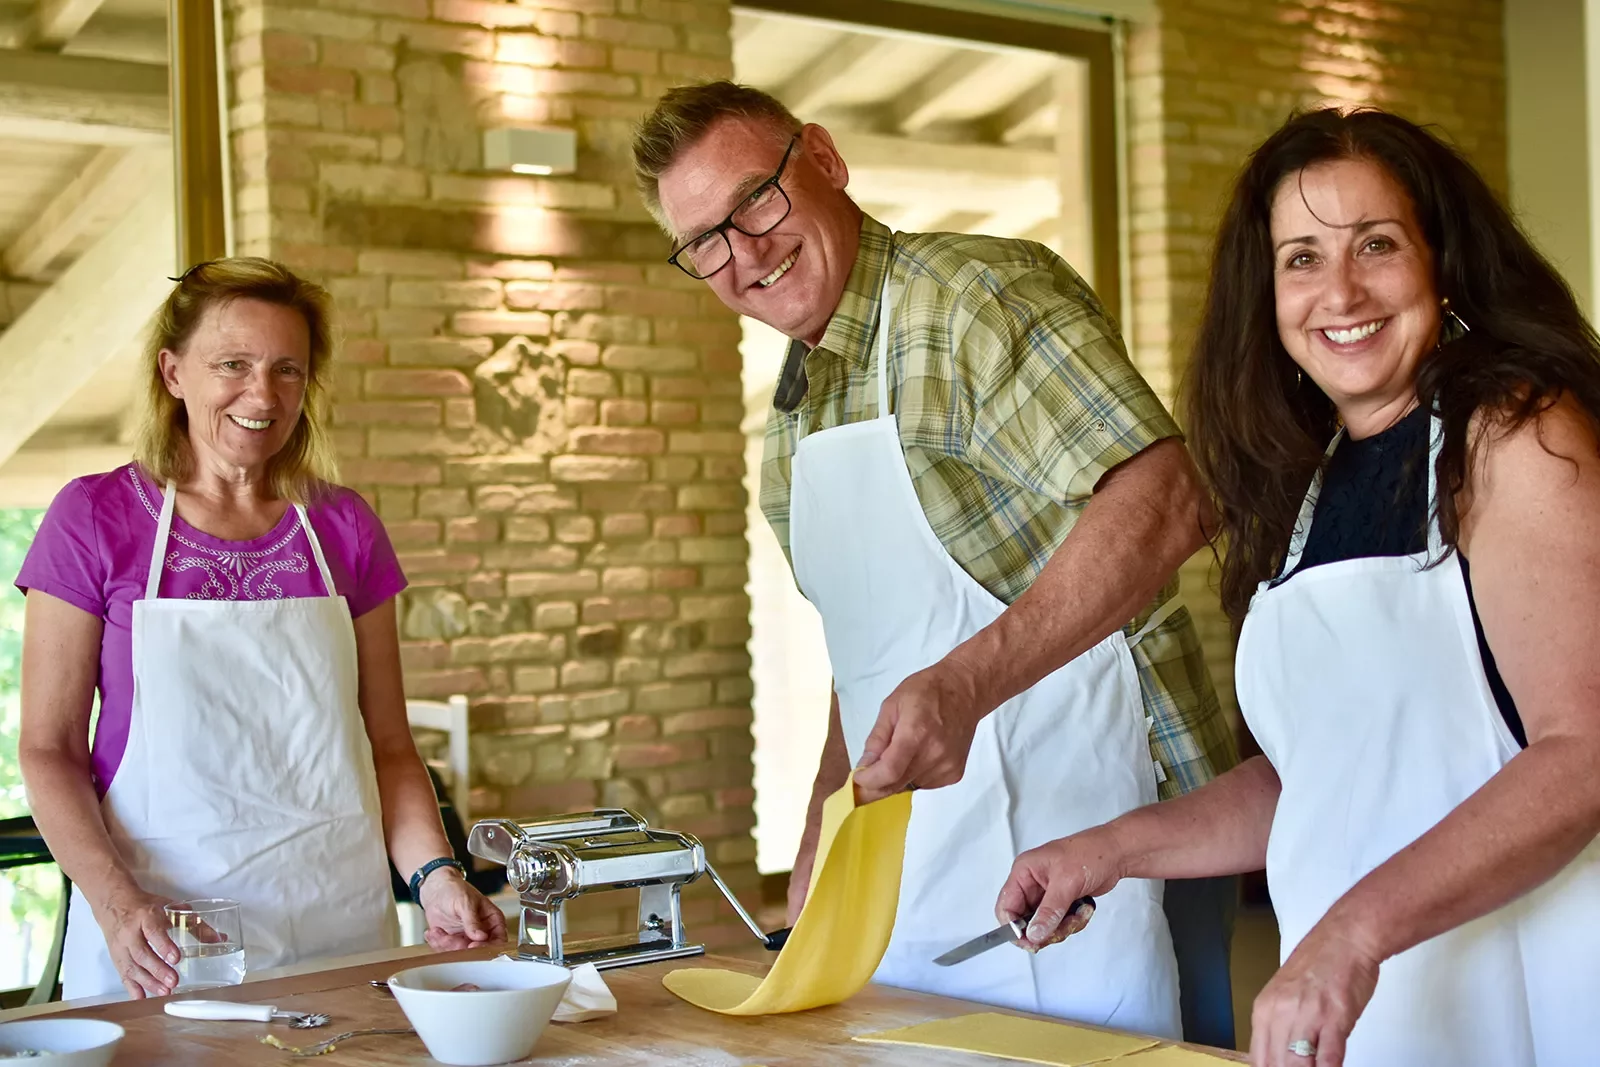 People smiling at the camera while rolling out pasta dough